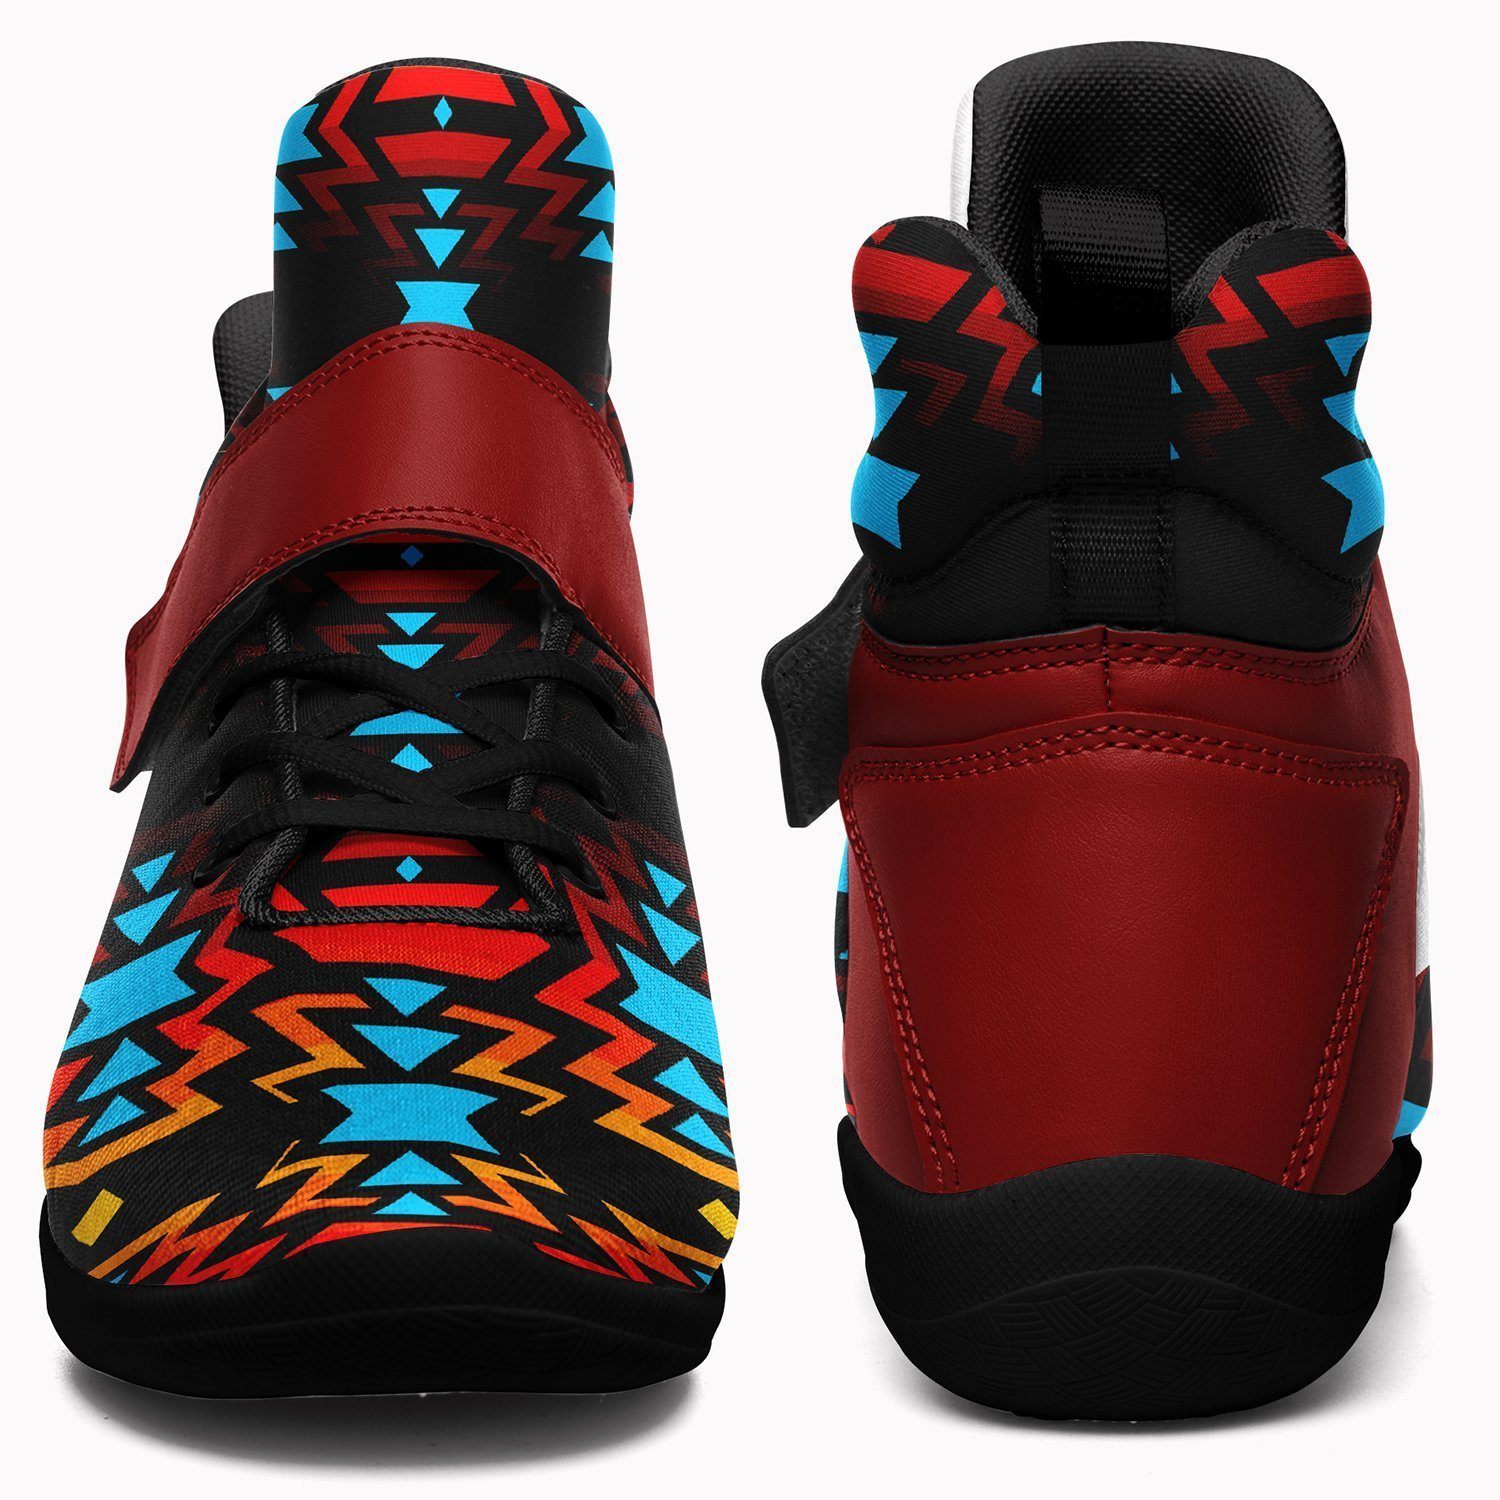 Black Fire and Turquoise Ipottaa Basketball / Sport High Top Shoes - Black Sole 49 Dzine 